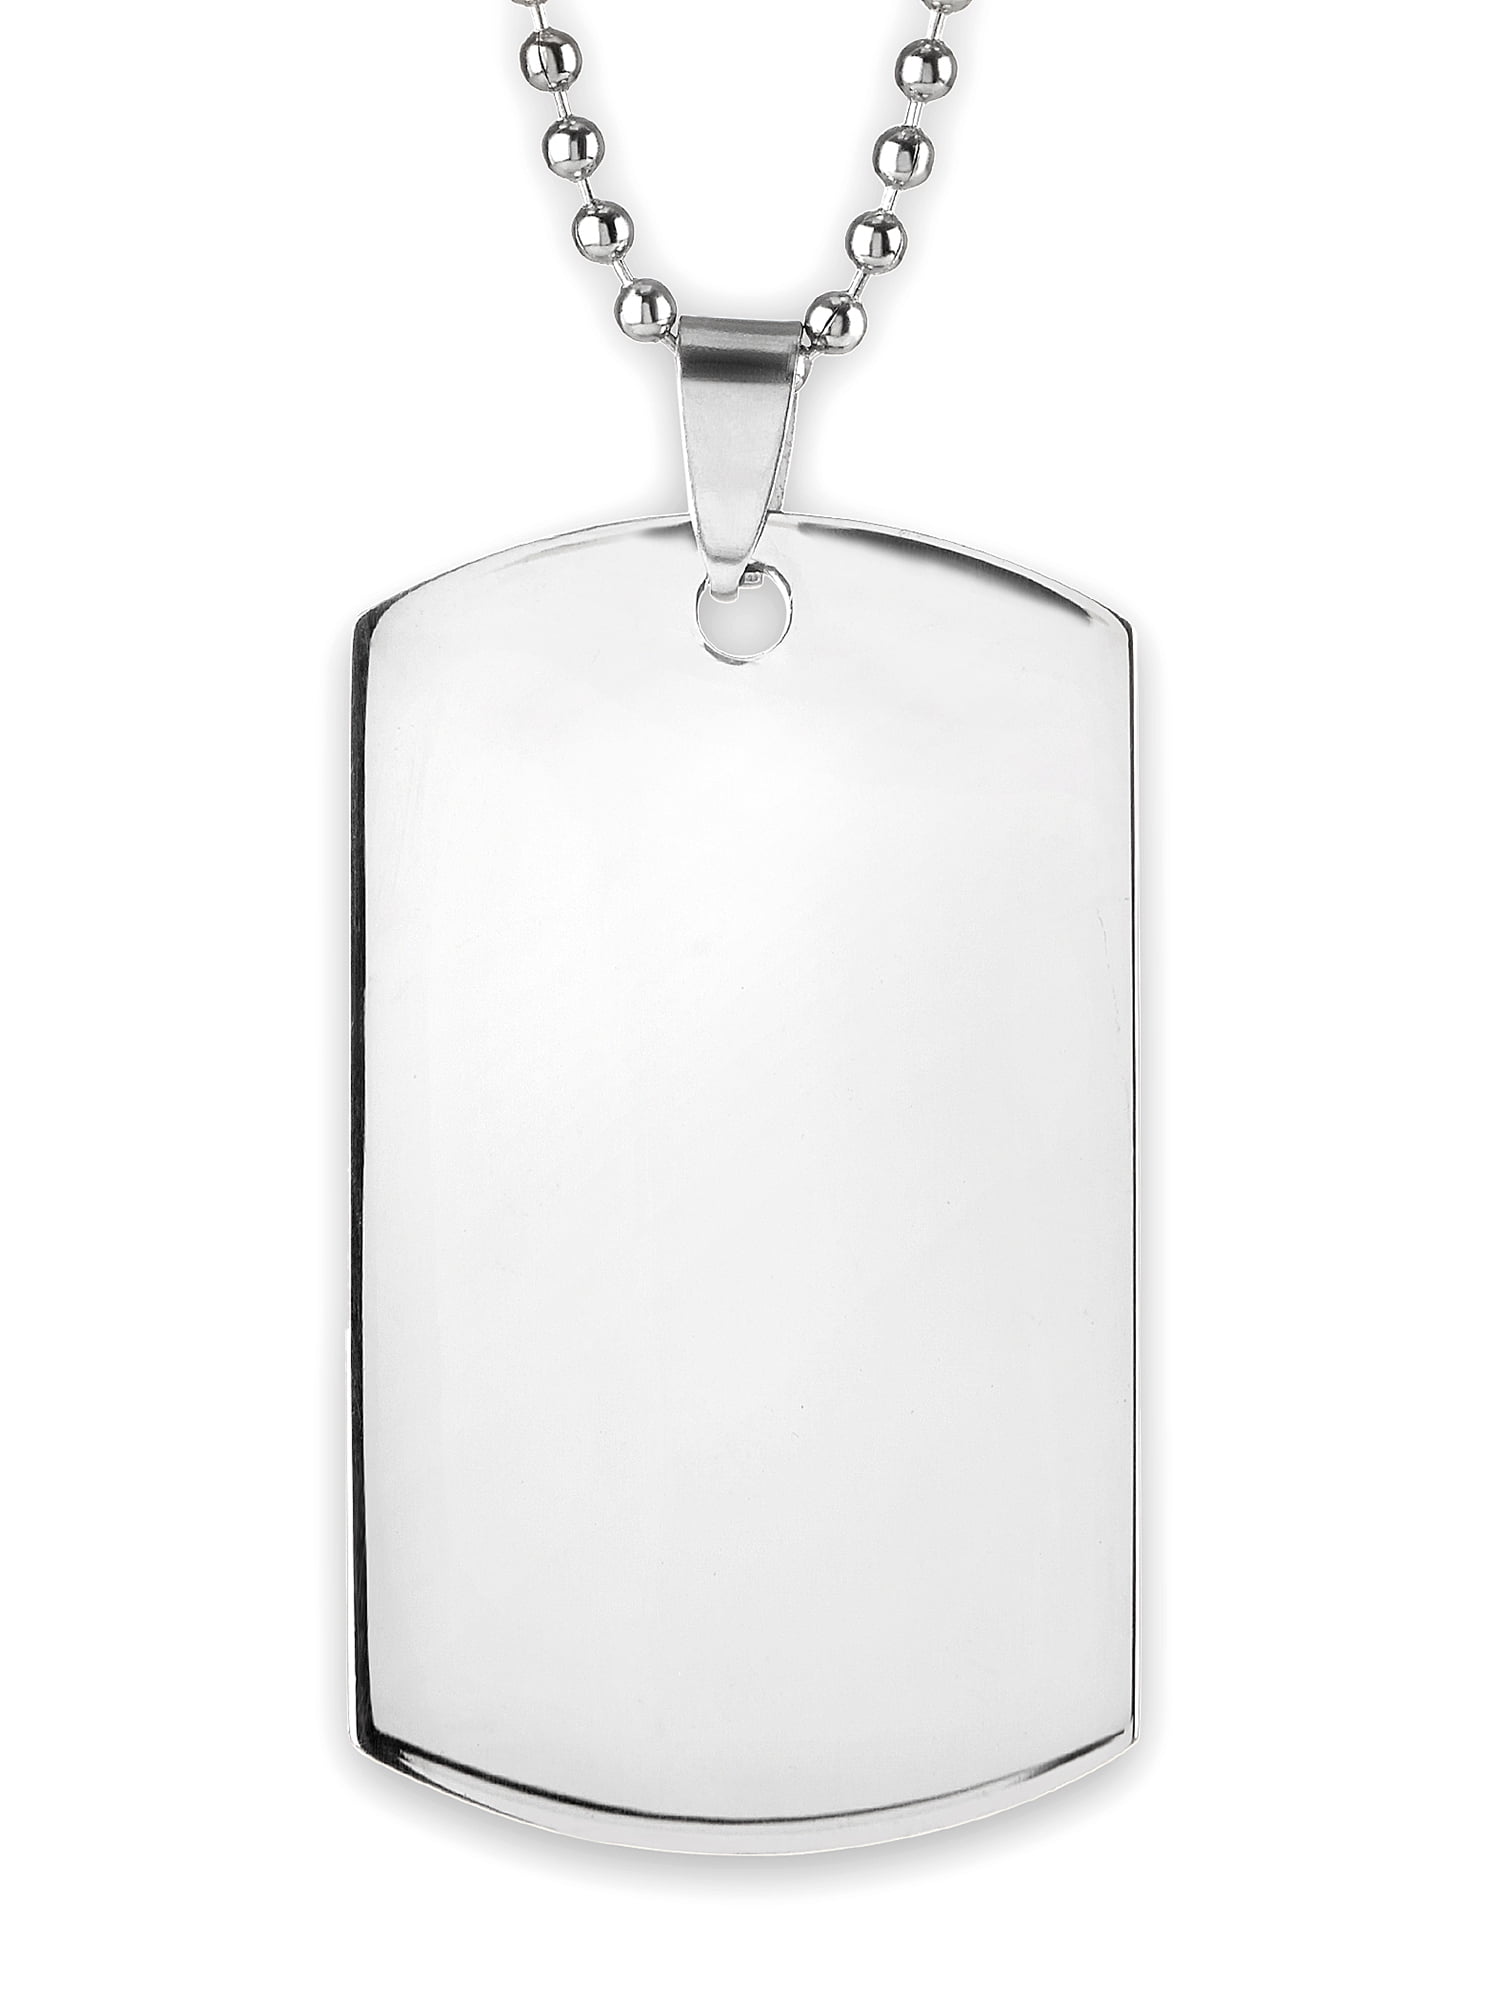 Short Stainless Steel Ball Chain for Dog Tags - The Marine Shop